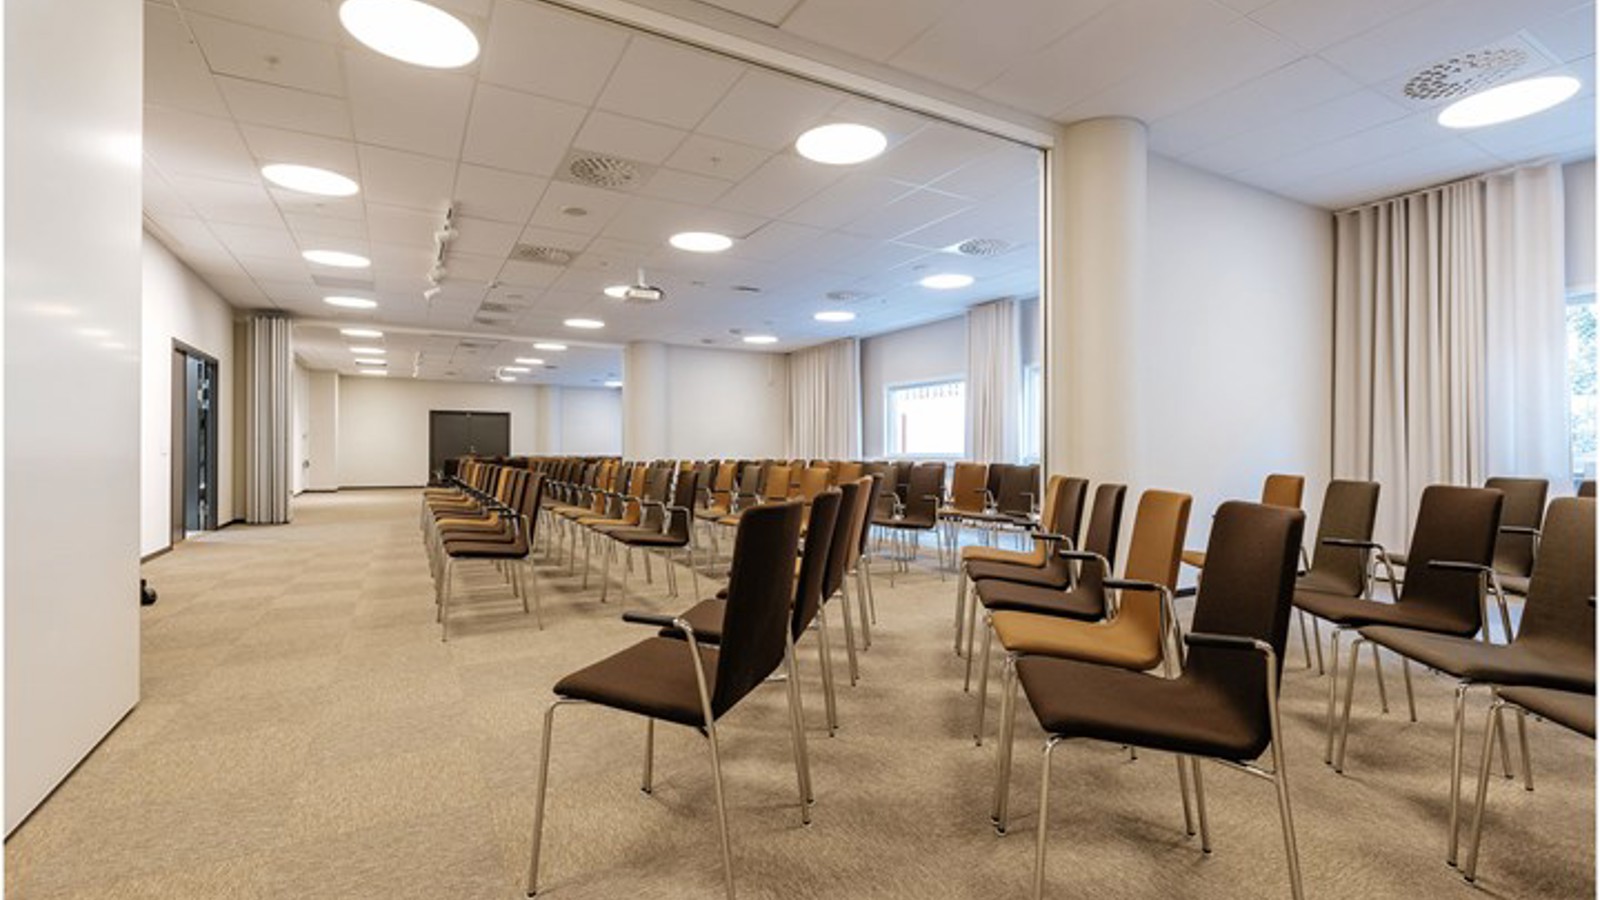 Conference room with cinema seating, brown chairs and large windows